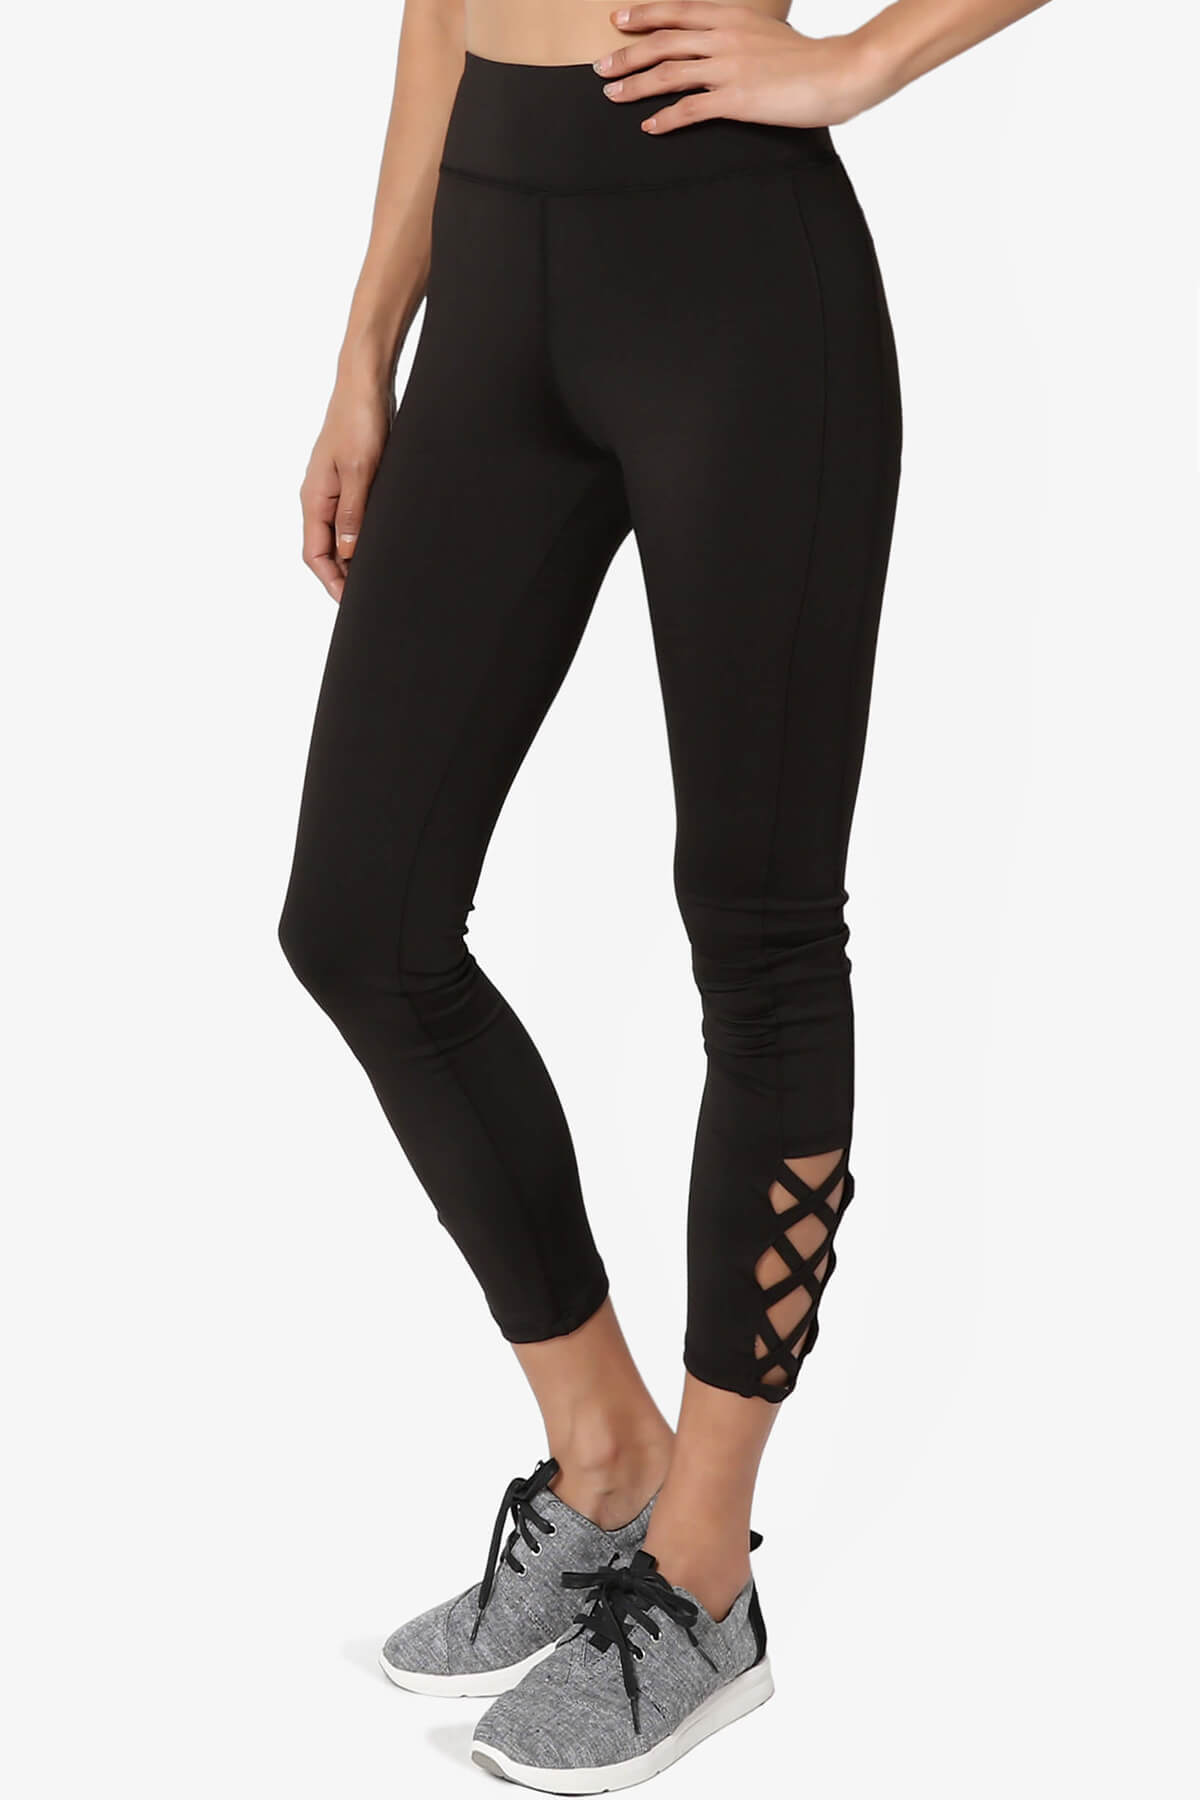 Load image into Gallery viewer, Levy Cutout Crop Yoga Sport Leggings BLACK_3
